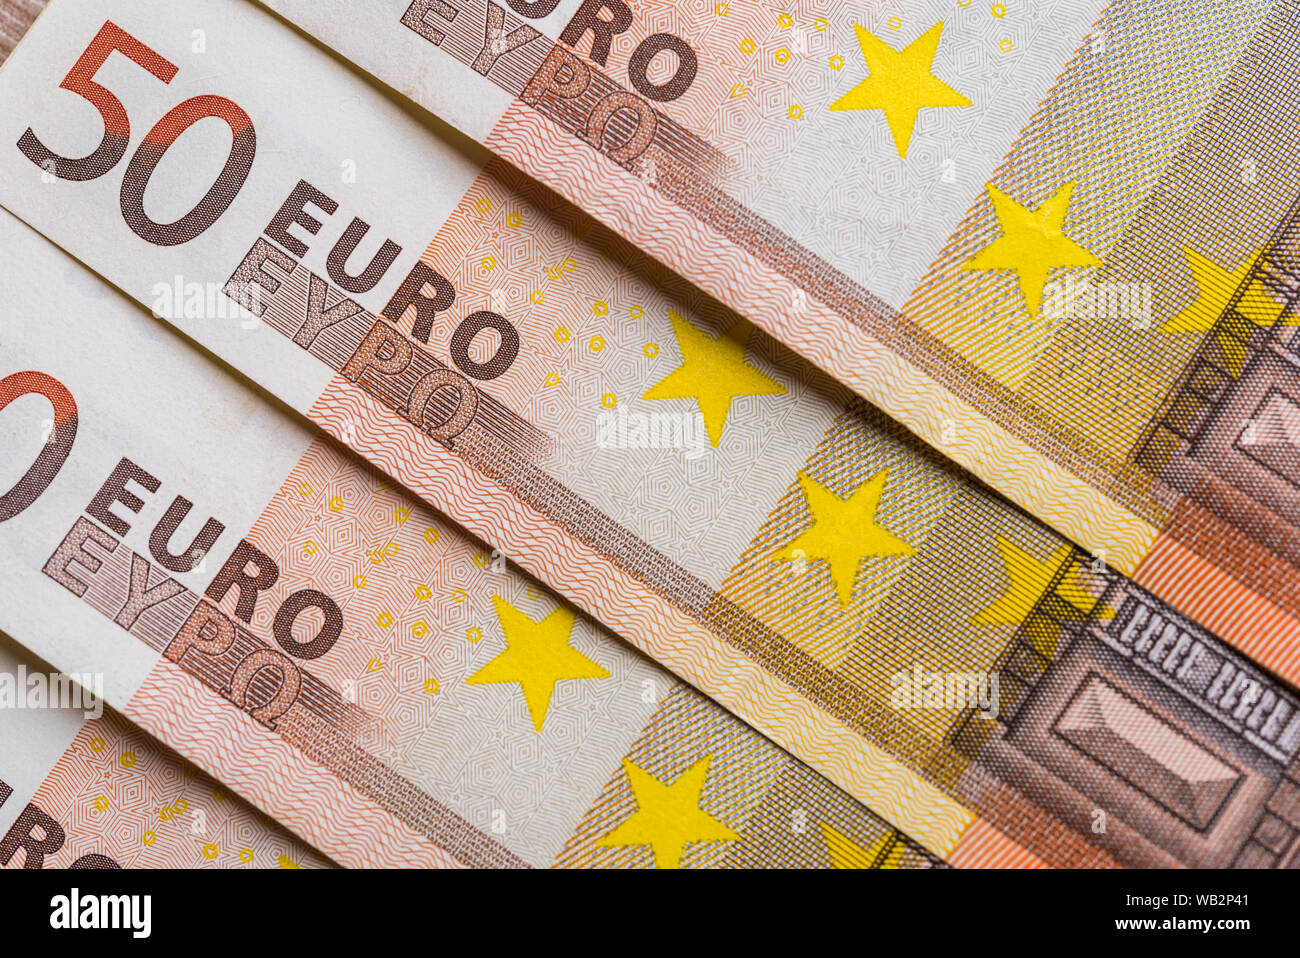 Euro currency of 50 euros. Concept of finance, business, European Union. Stock Photo